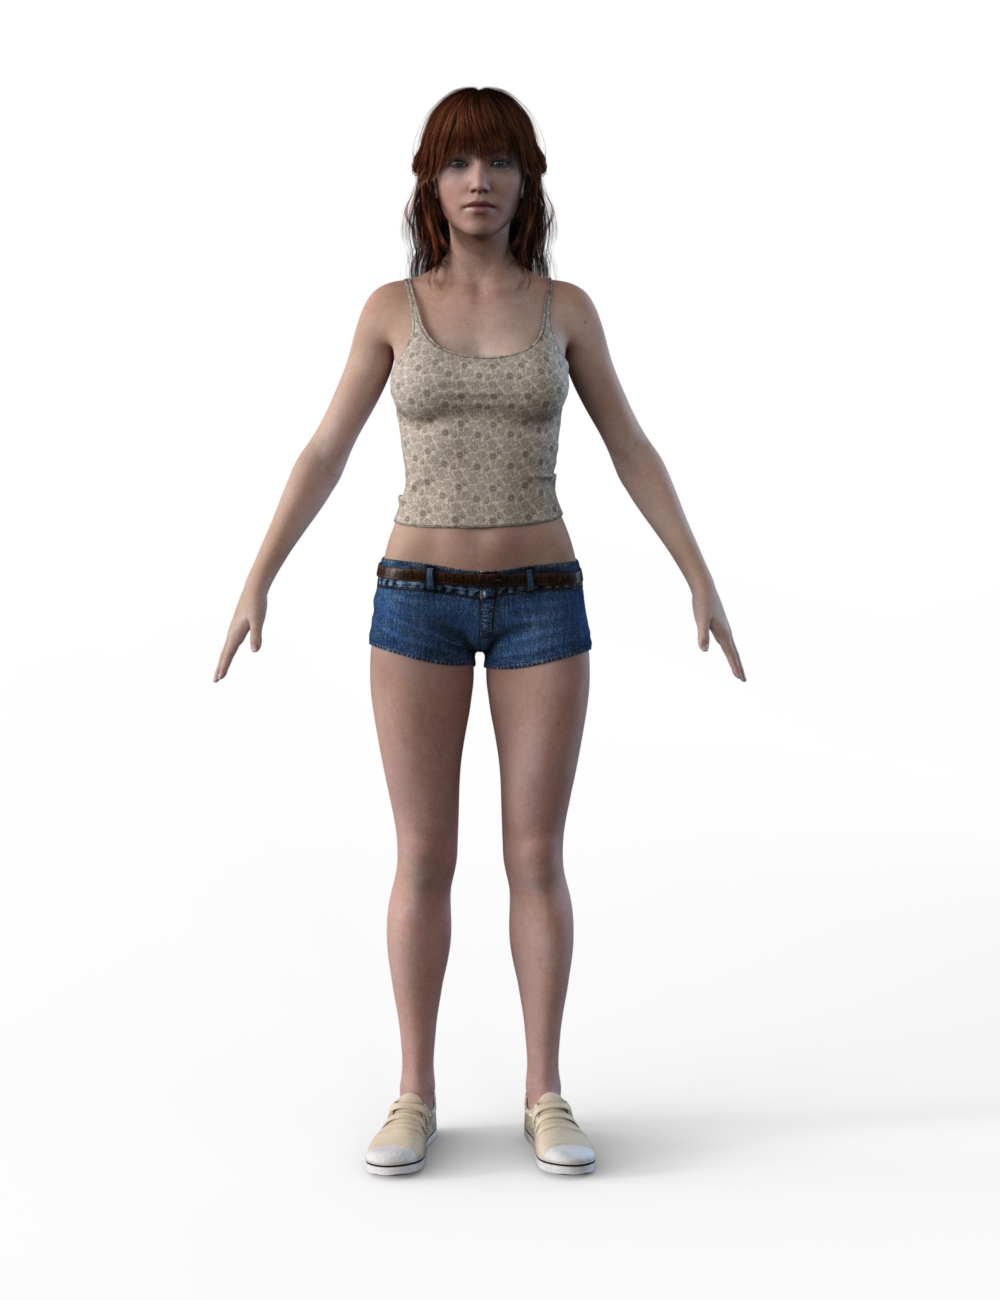 FBX- Base Female Casual Sunday Outfit by: Paleo, 3D Models by Daz 3D